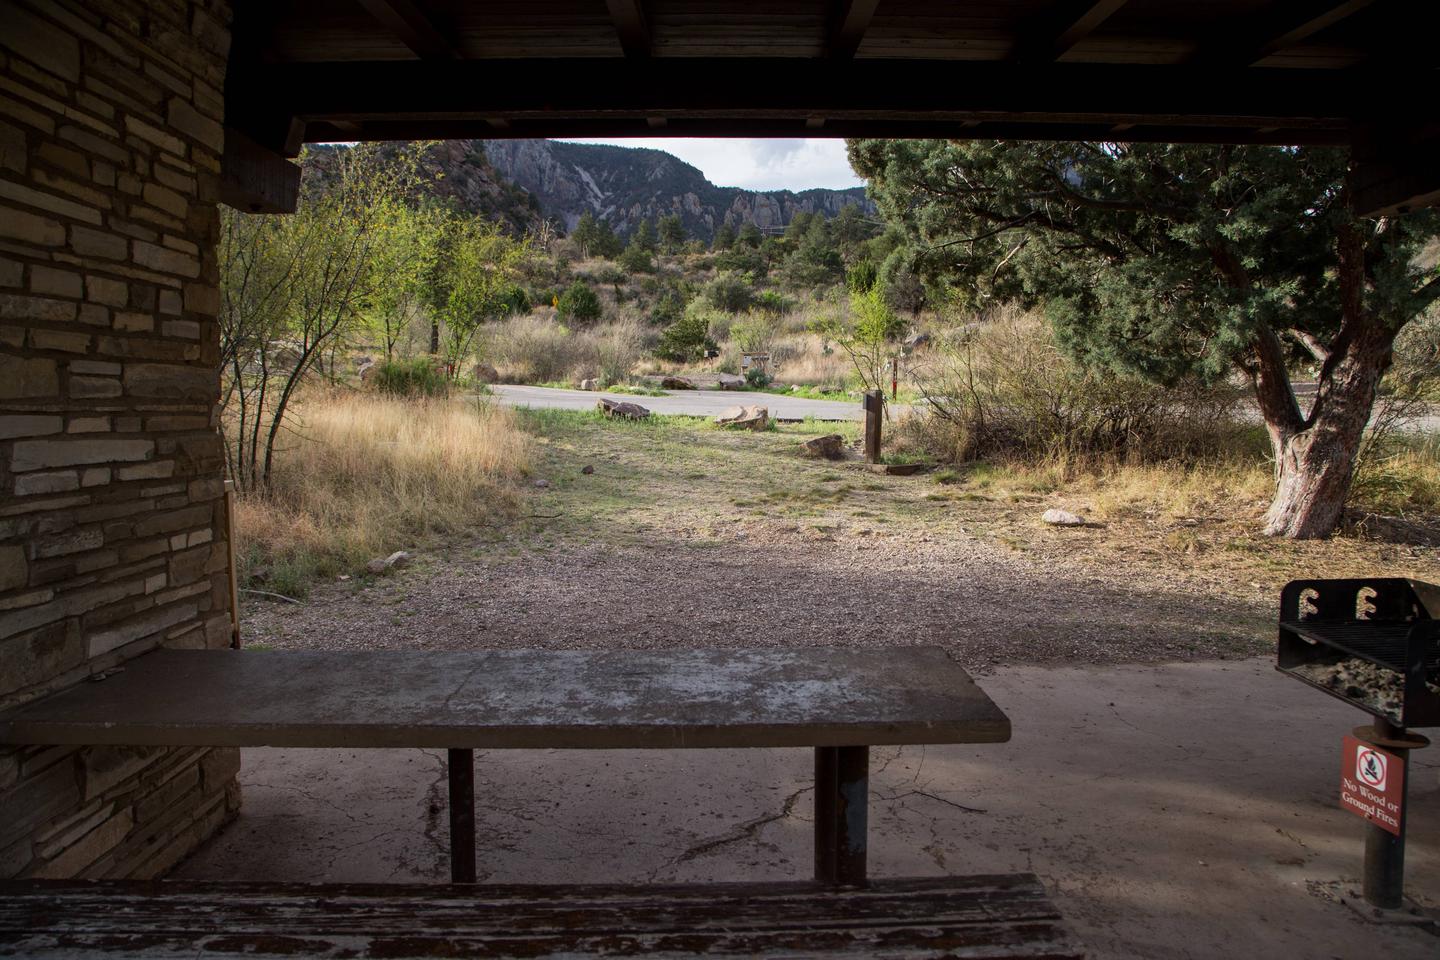 Chisos Basin Campsite #9 interiorPicnic table and grill.